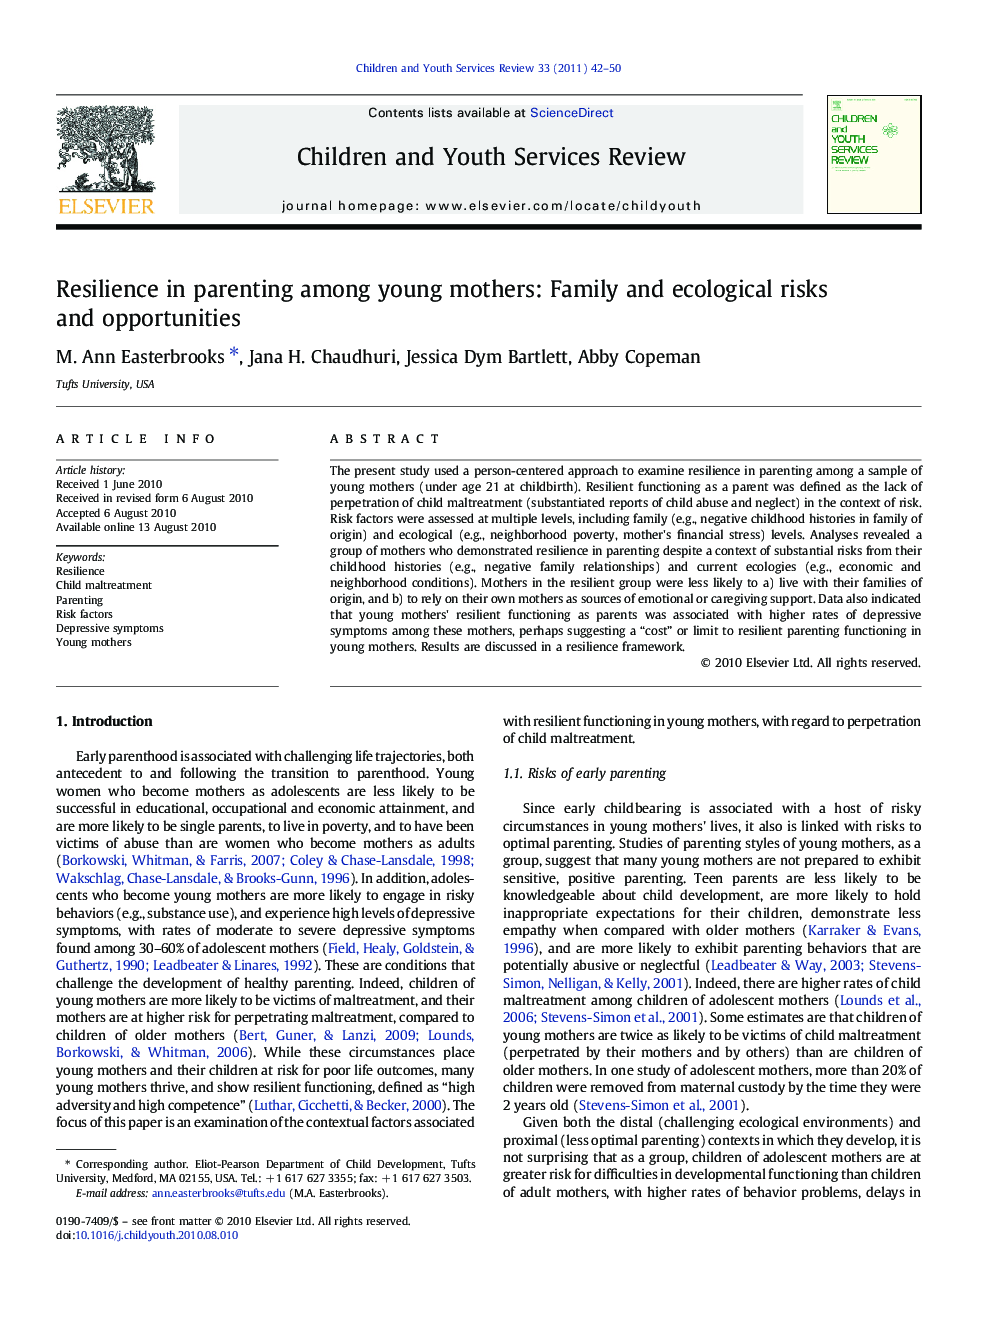 Resilience in parenting among young mothers: Family and ecological risks and opportunities